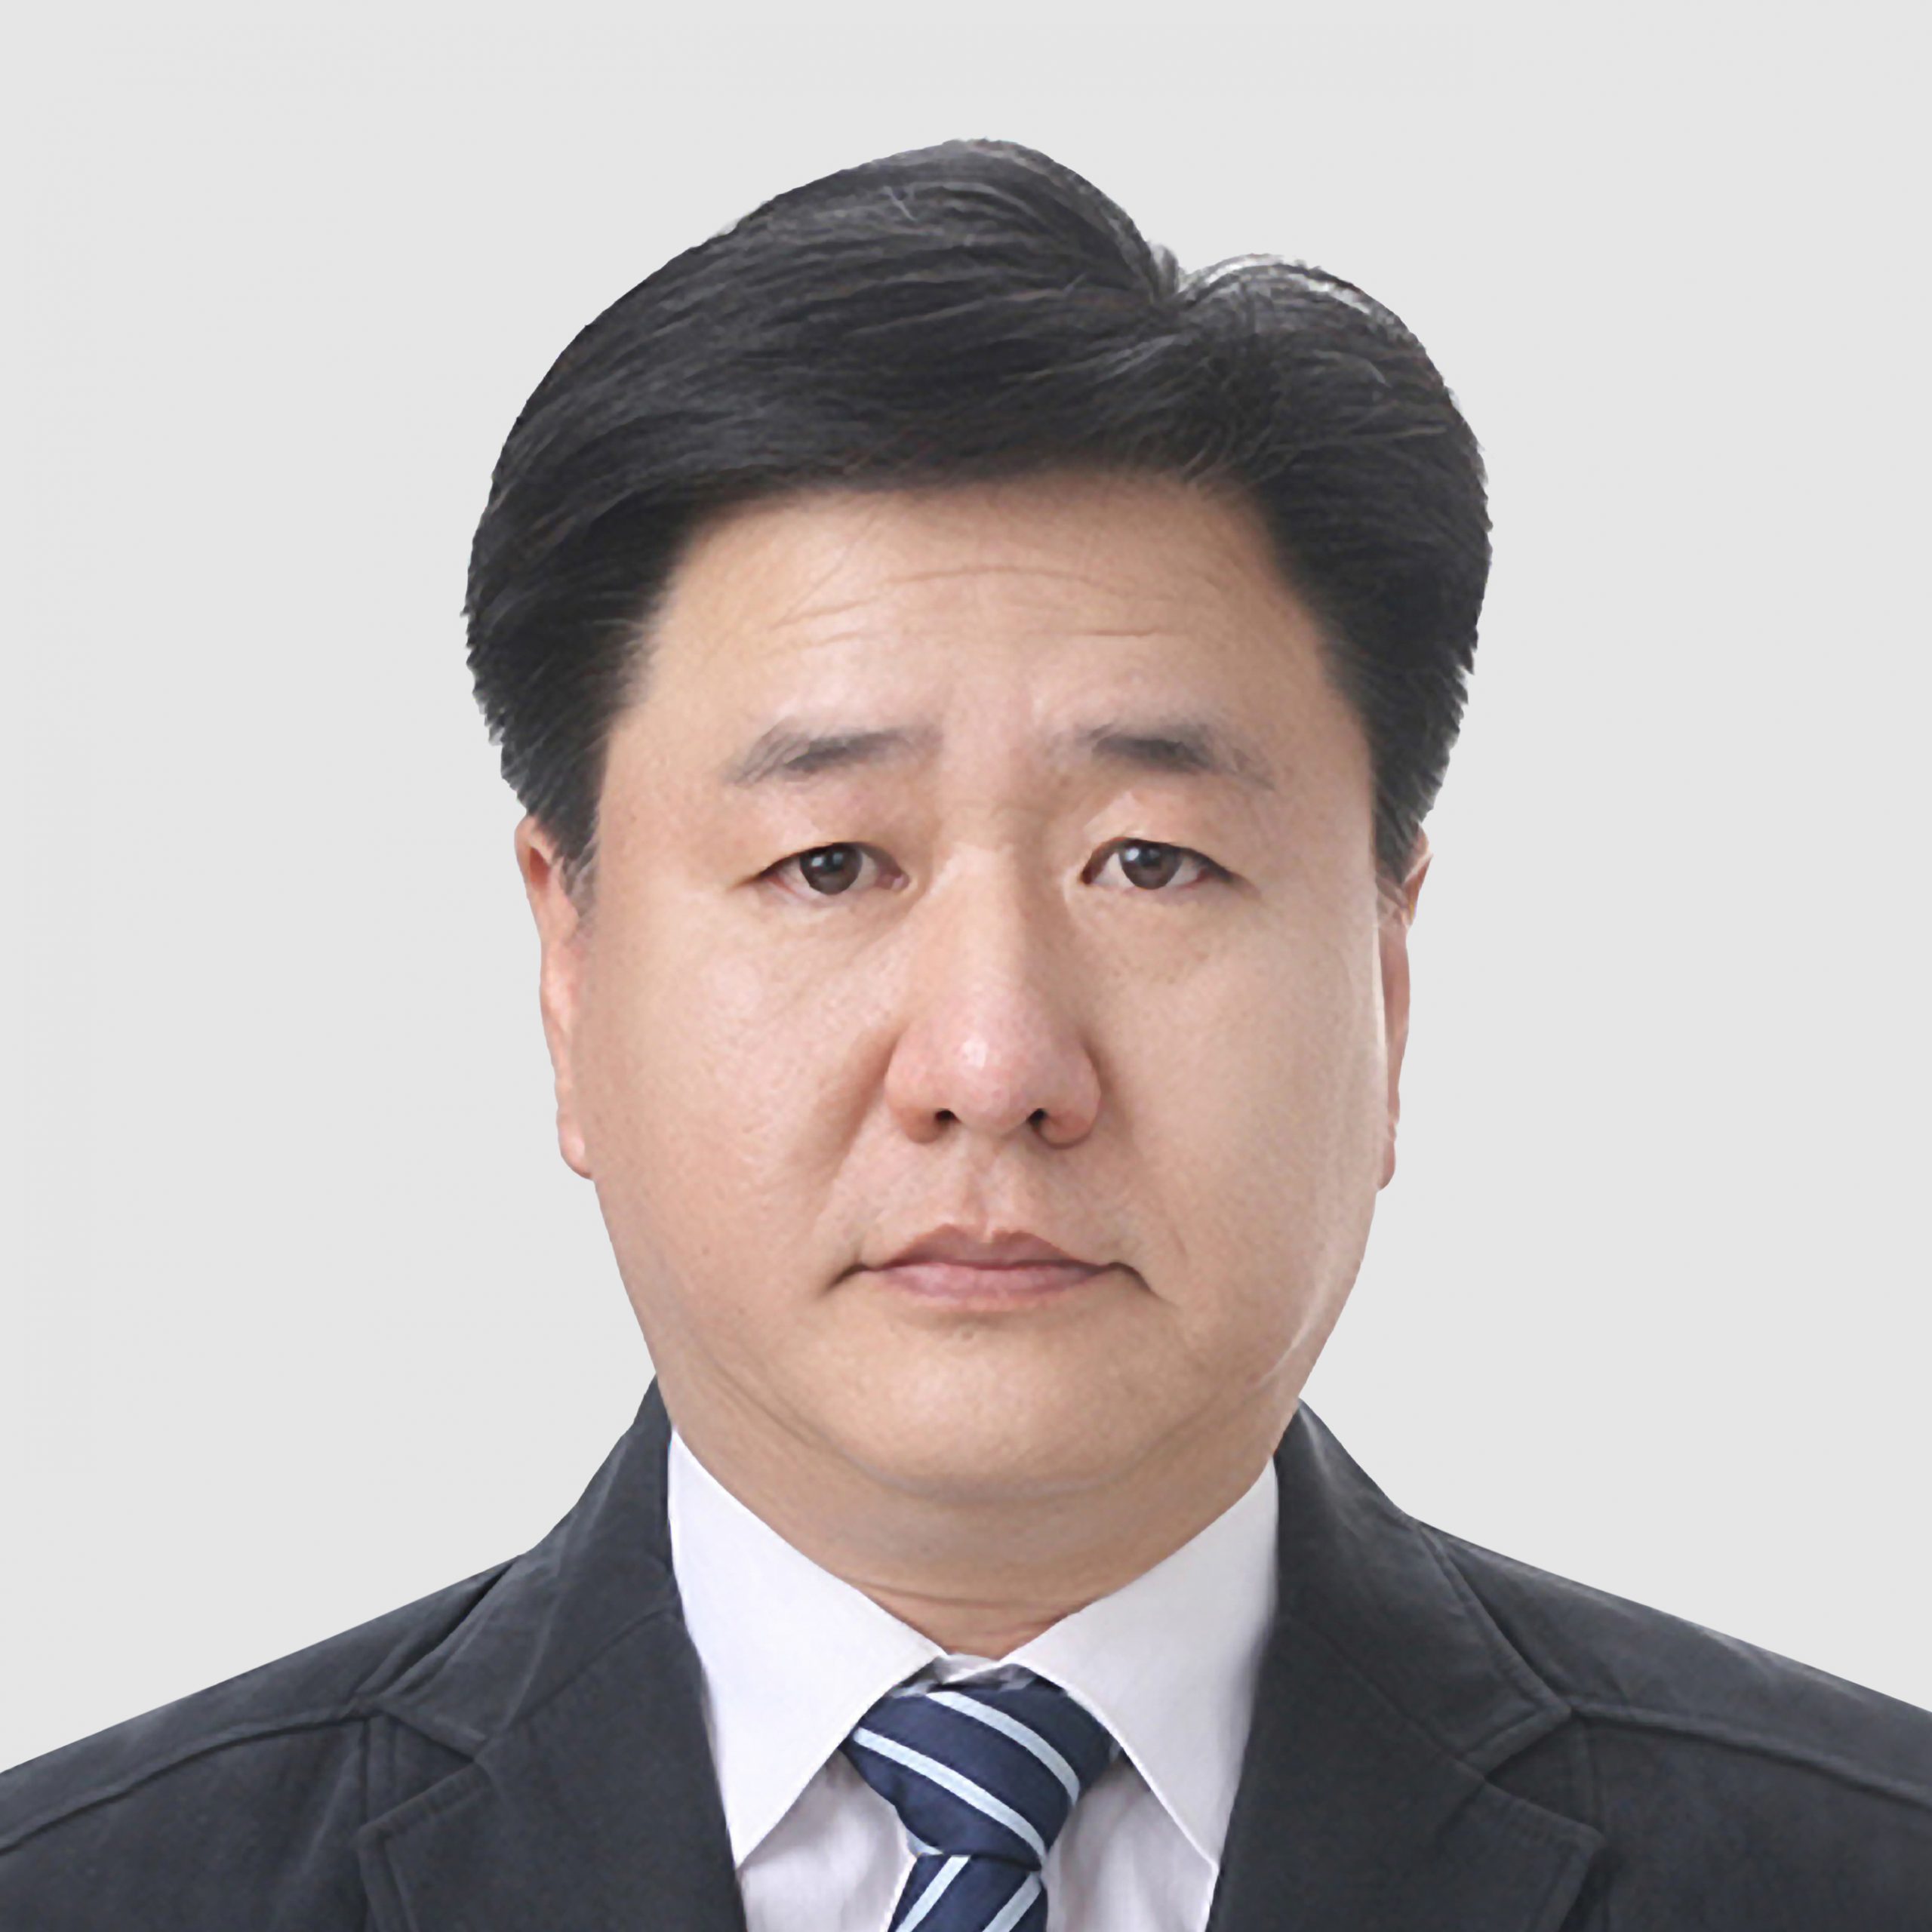 Joonhee (Albert) Lee is the President, Essex Furukawa Magnet Wire Asia, a role that focuses on the automotive industry with a specific emphasis on traction motors. Prior to this, Lee was the Managing Director for our Suzhou plant and spent four years as Executive Director of Technology for Essex Magnet Wire. Over the last quarter century Lee has been involved in developing new technology with a focus on the automotive industry. He has improved magnet wire property design for motor applications, as well as improved properties for enameling. Lee obtained his Master’s Degree in Industrial Chemistry at Kyungpook National University in South Korea.